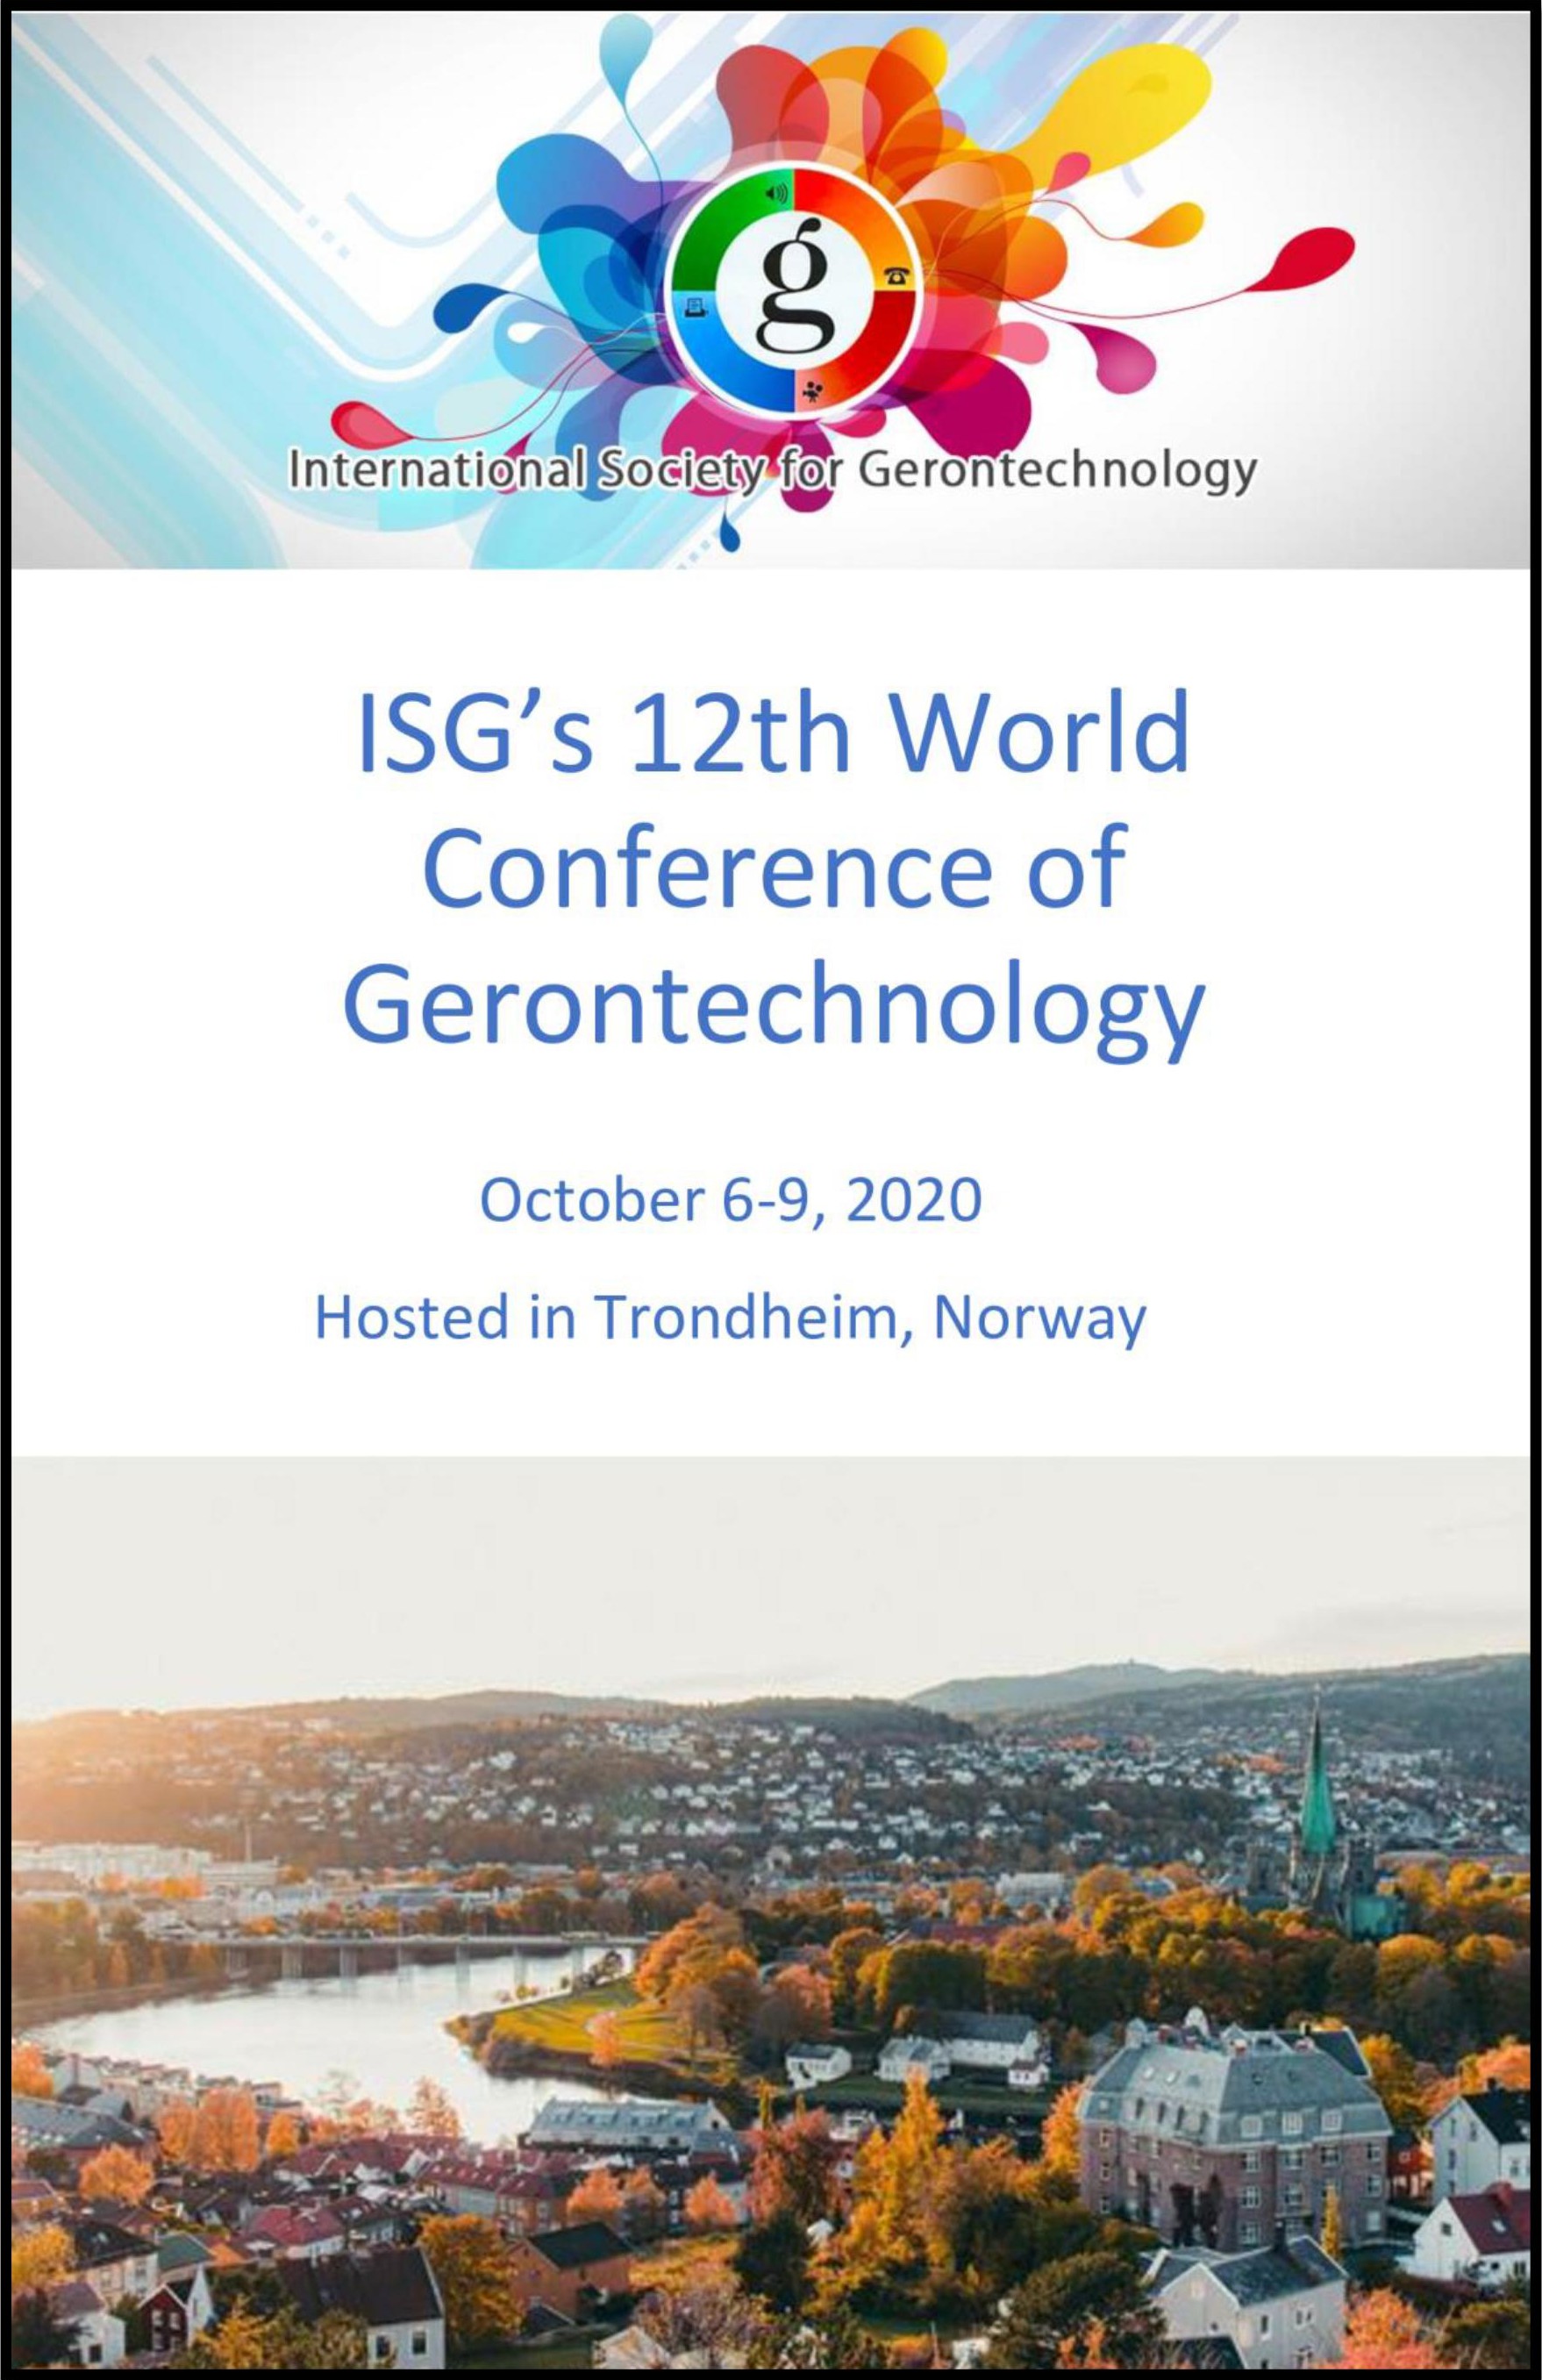 2016 ISG Conference logo